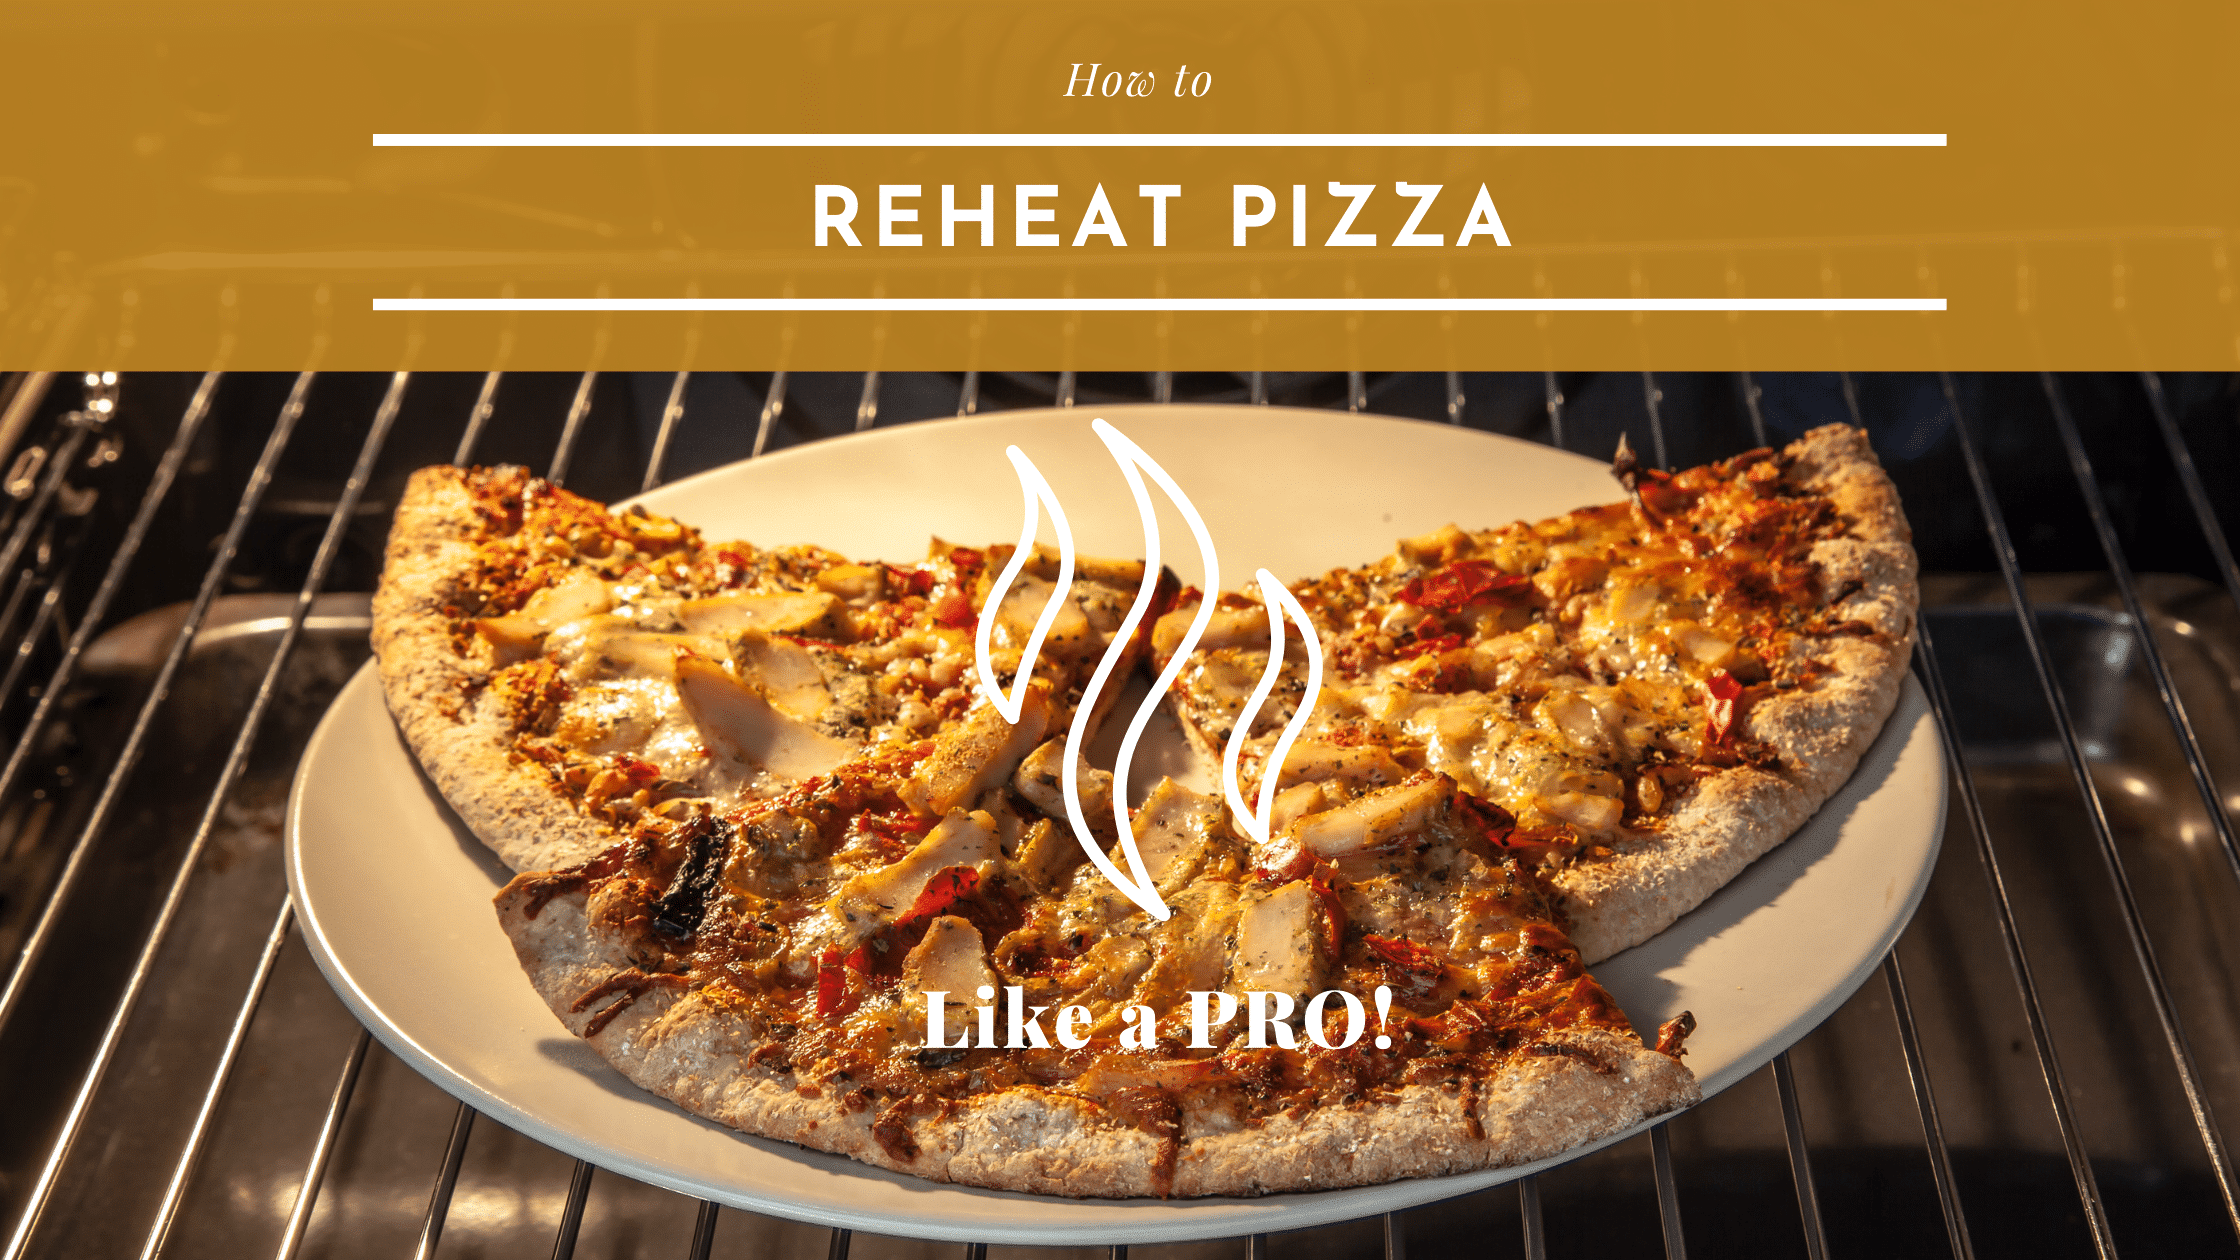 How to Reheat Pizza in Oven Like a PRO!